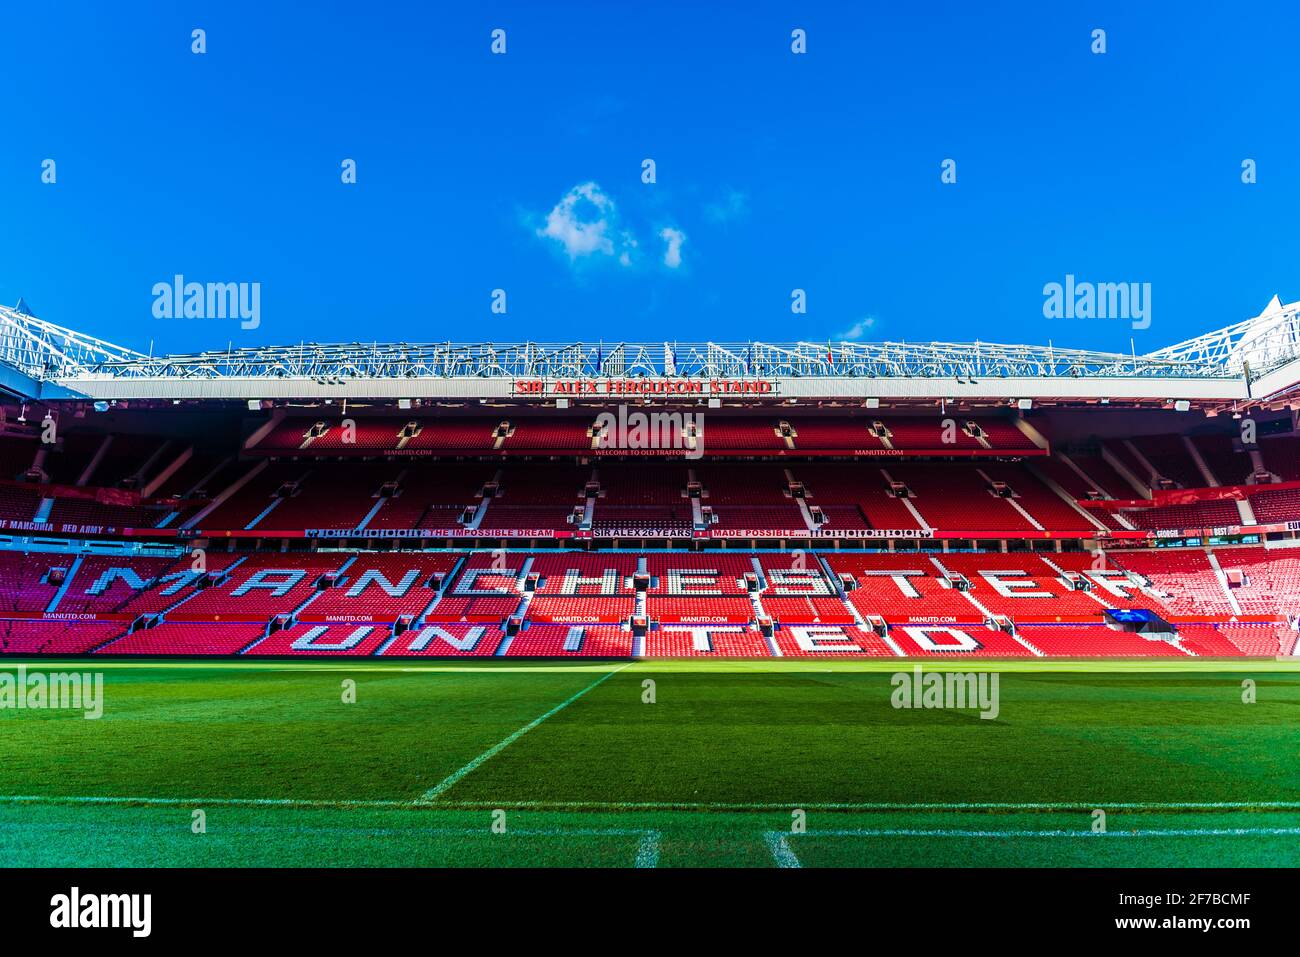 The Theatre of Dreams, Old Trafford, Manchester. Stock Photo